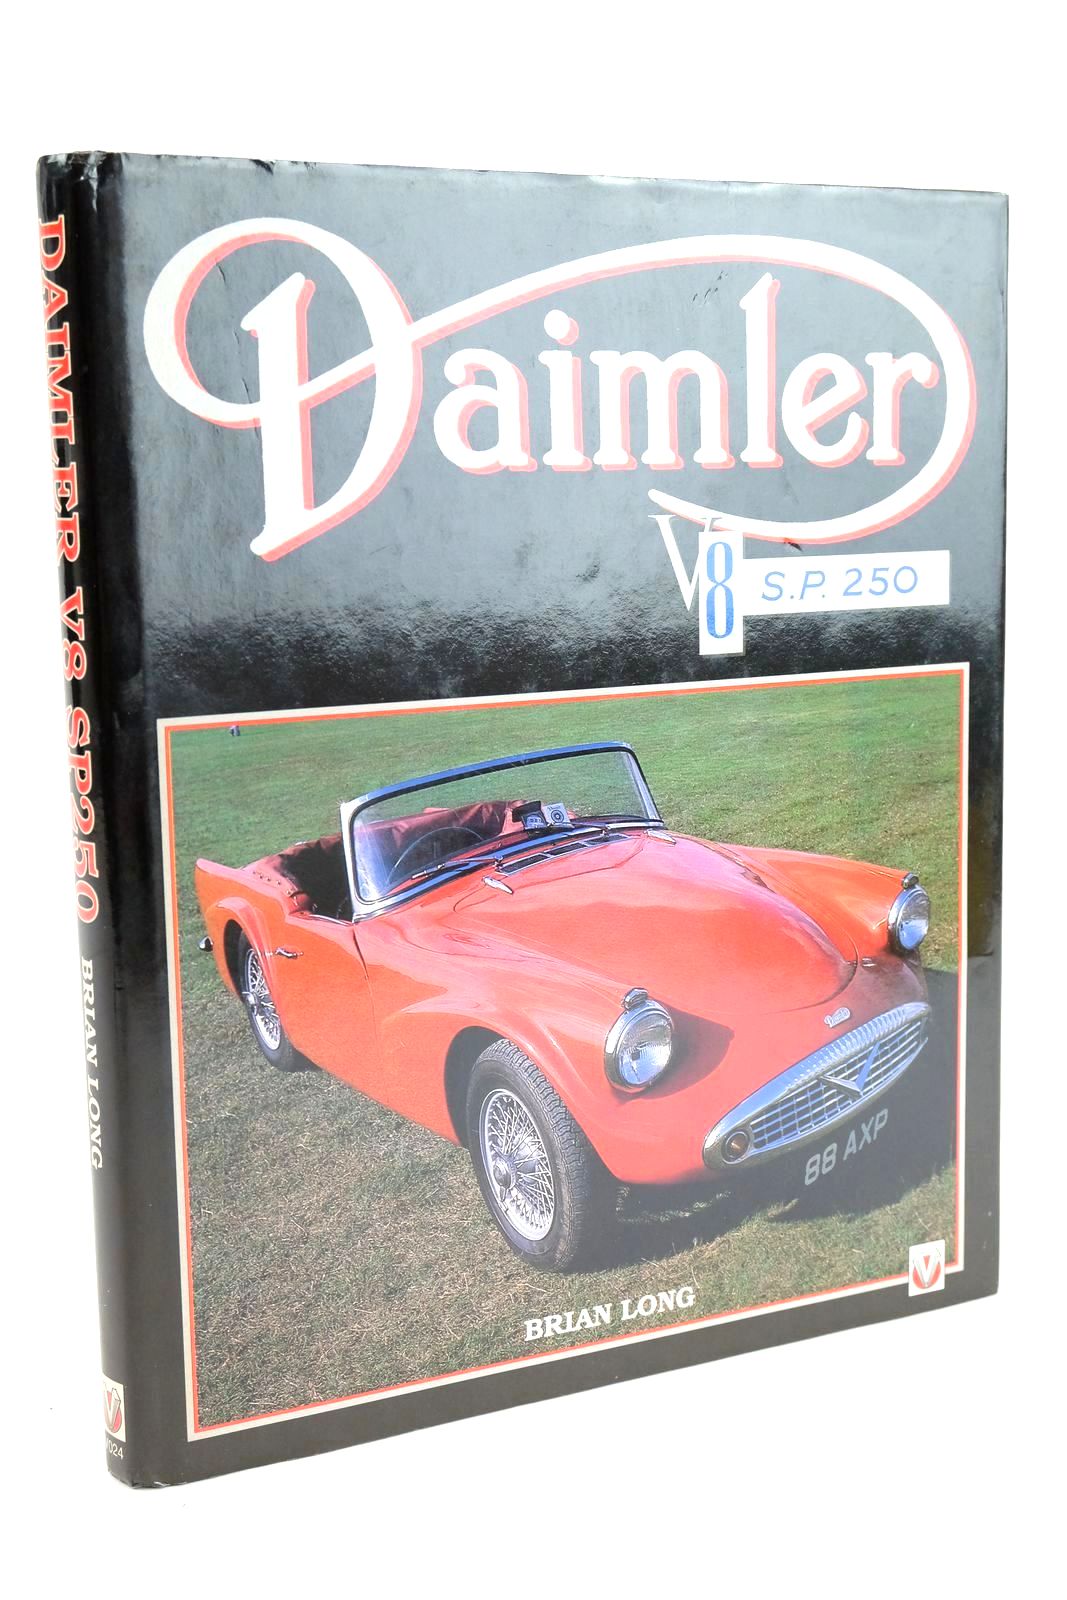 Photo of DAIMLER V8 S.P. 250 written by Long, Brian published by Veloce Publishing Plc. (STOCK CODE: 1324021)  for sale by Stella & Rose's Books